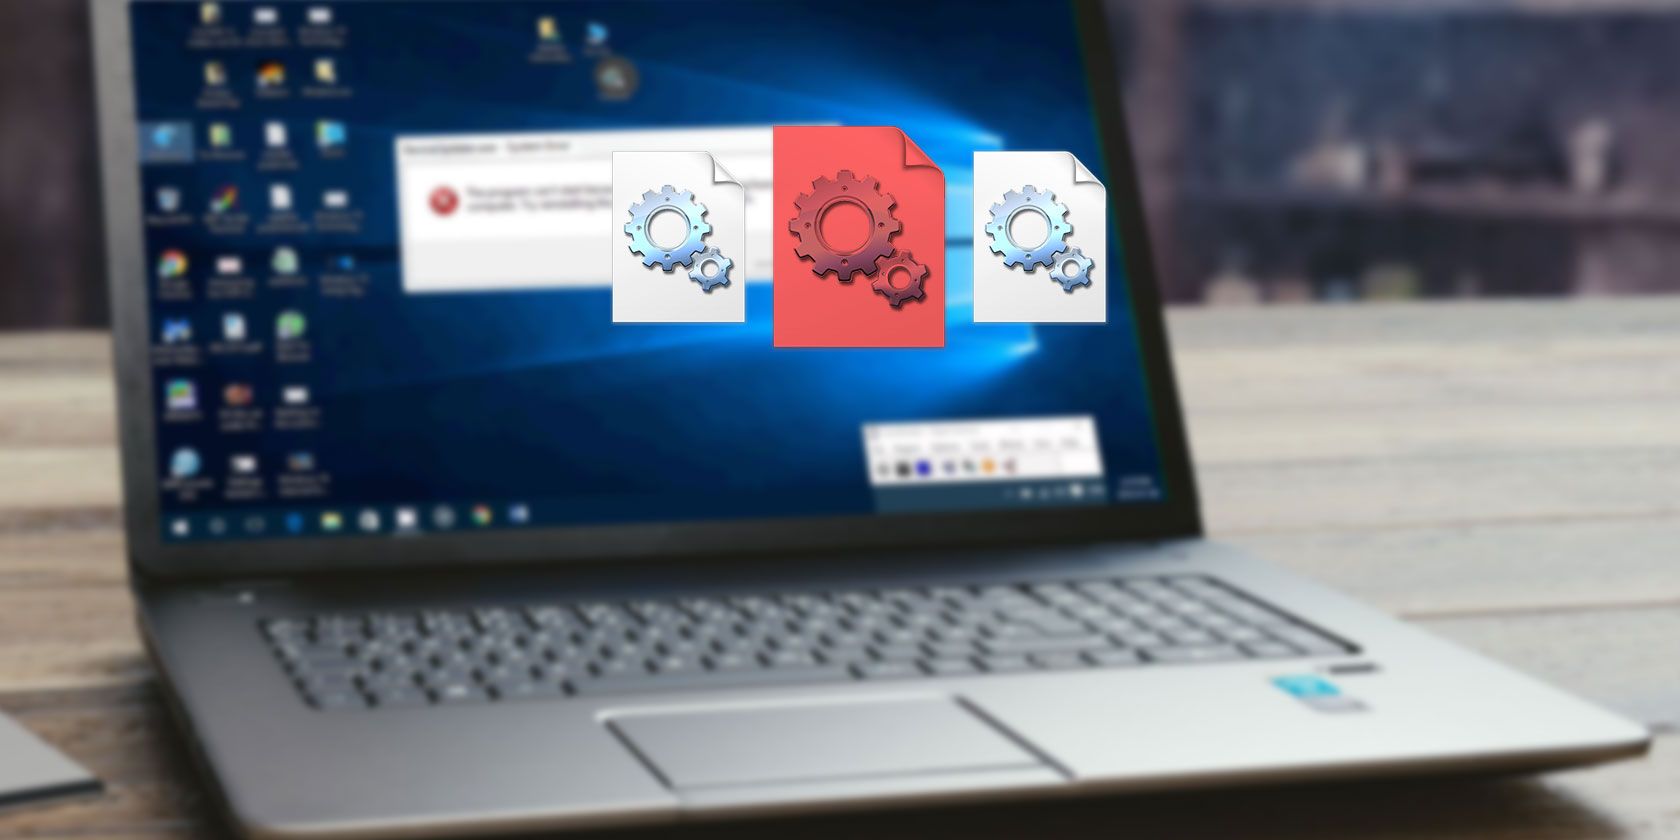 Windows 10 laptop with three DLL file icons in front, one of them in red